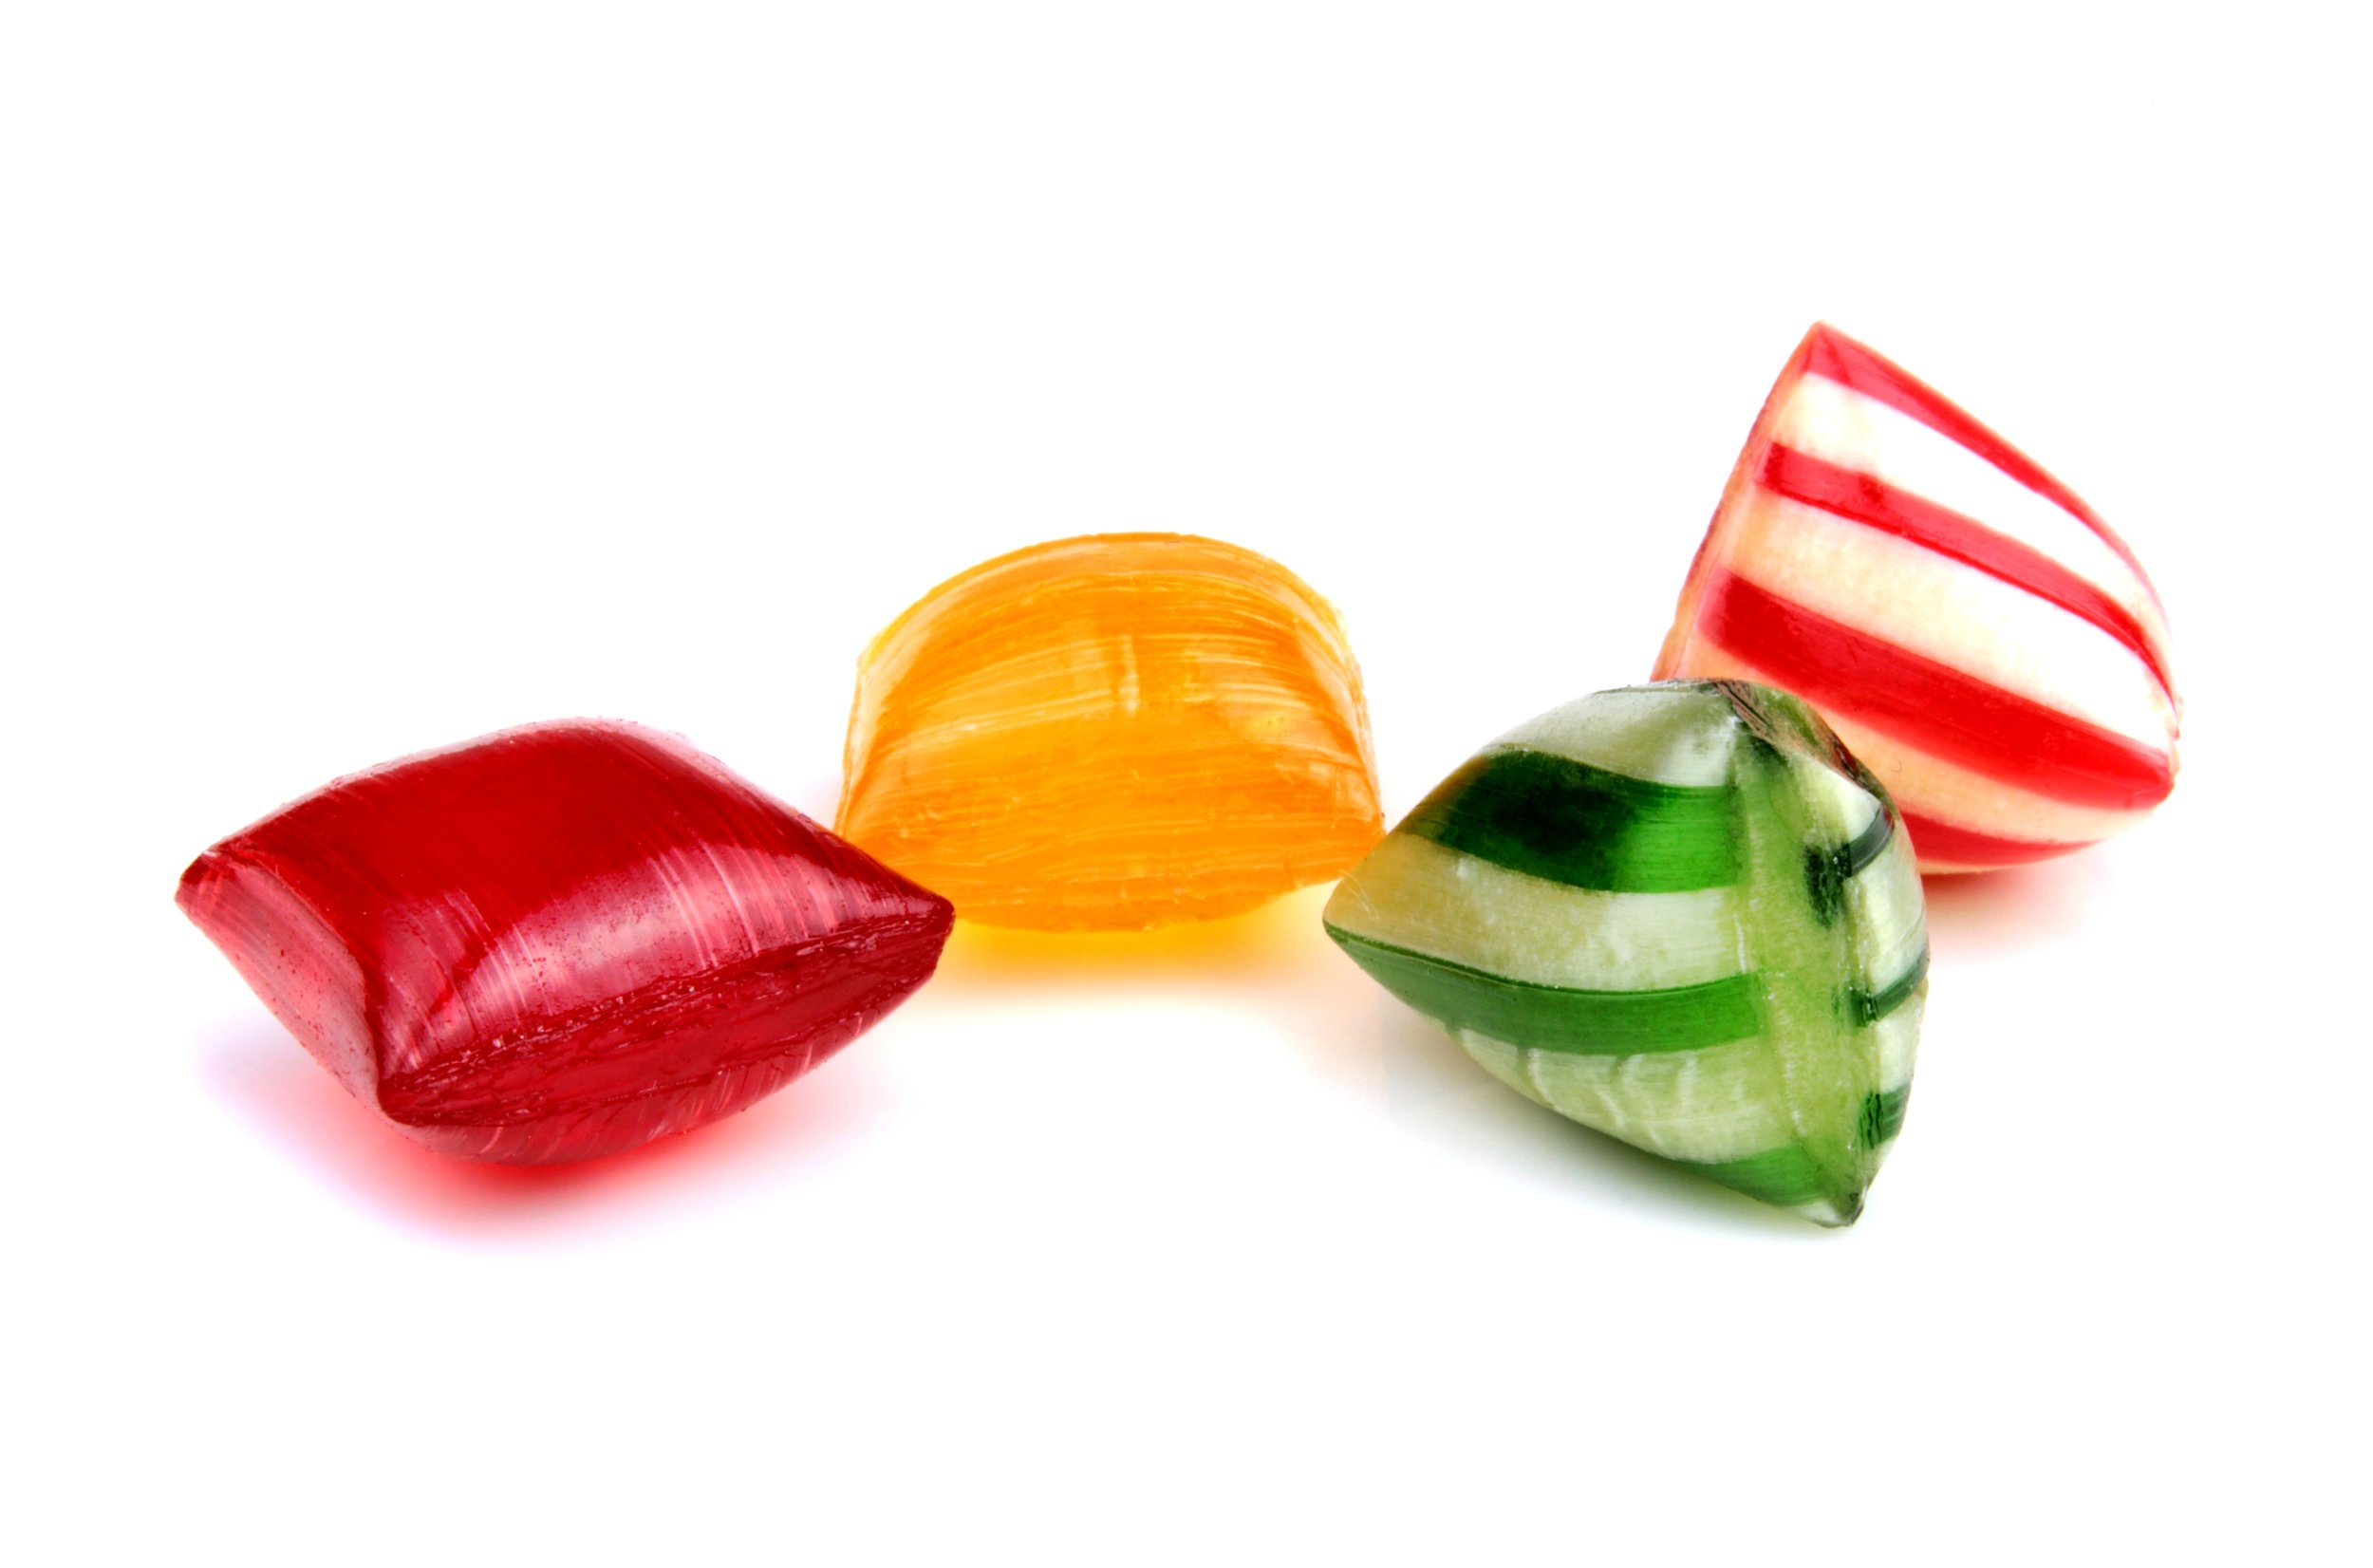 Applications Confectionery iStock-506010090.jpg